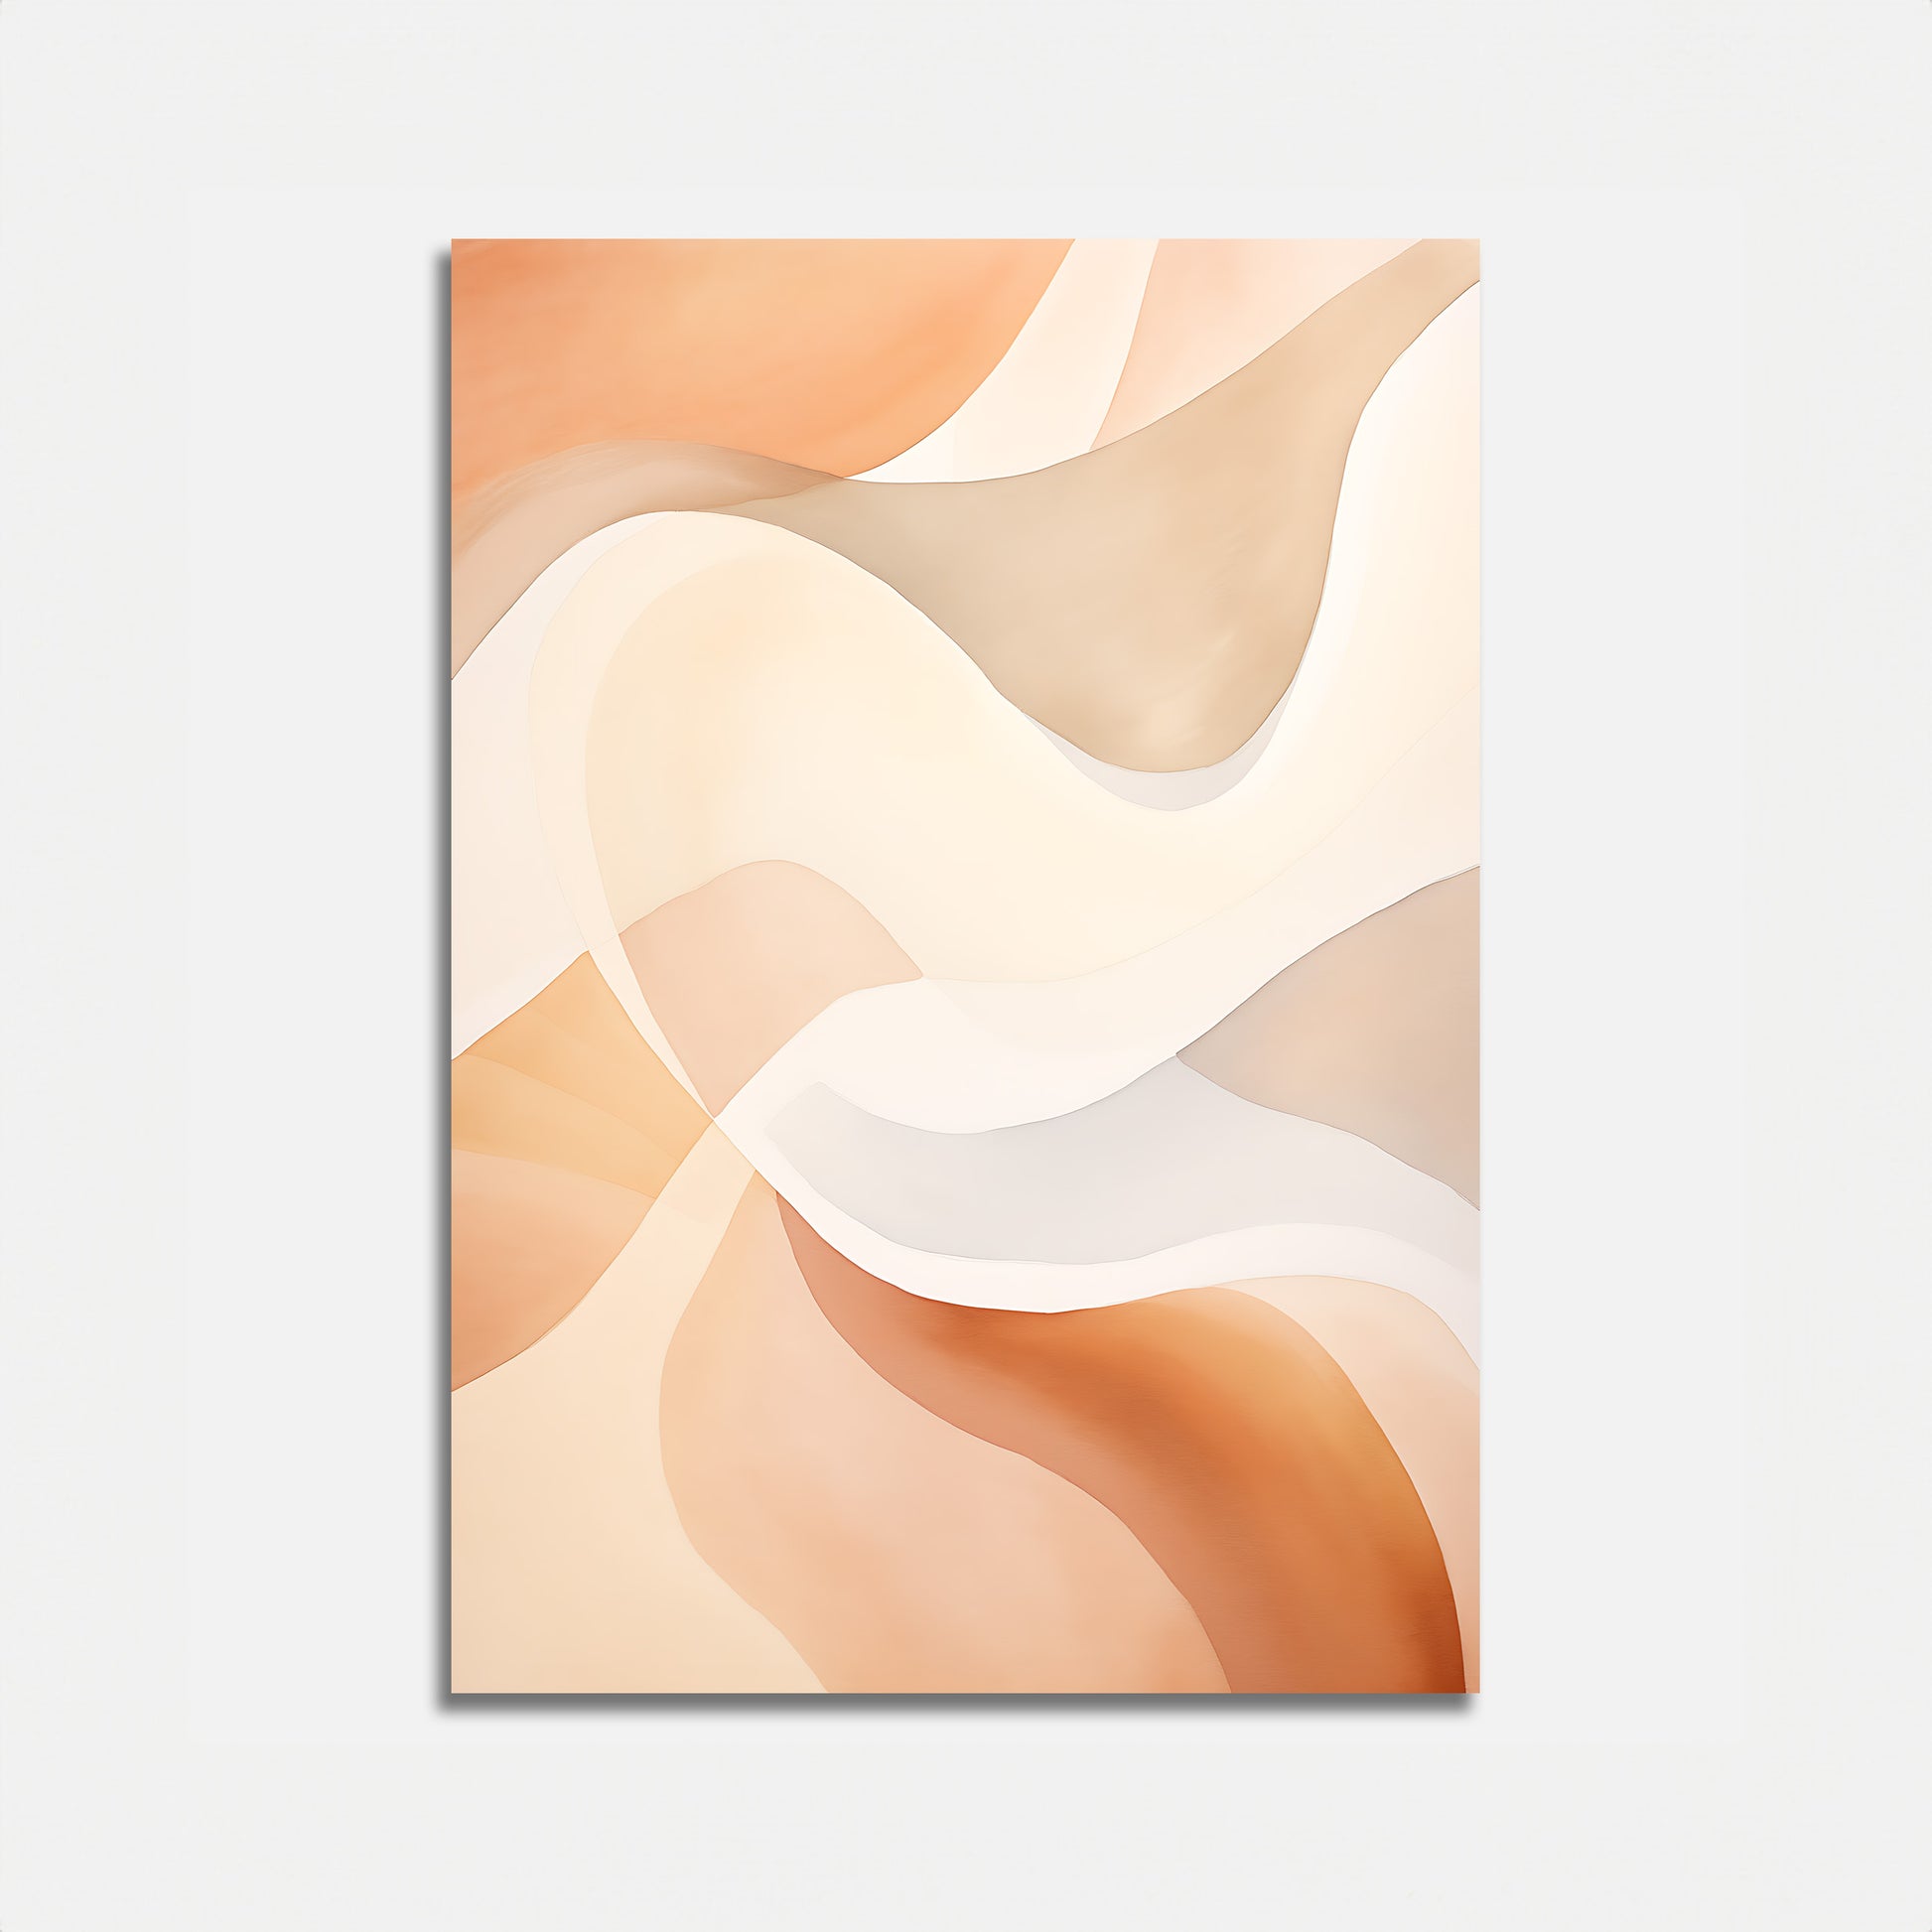 Abstract painting with smooth, flowing curves in warm earth tones on a white background.